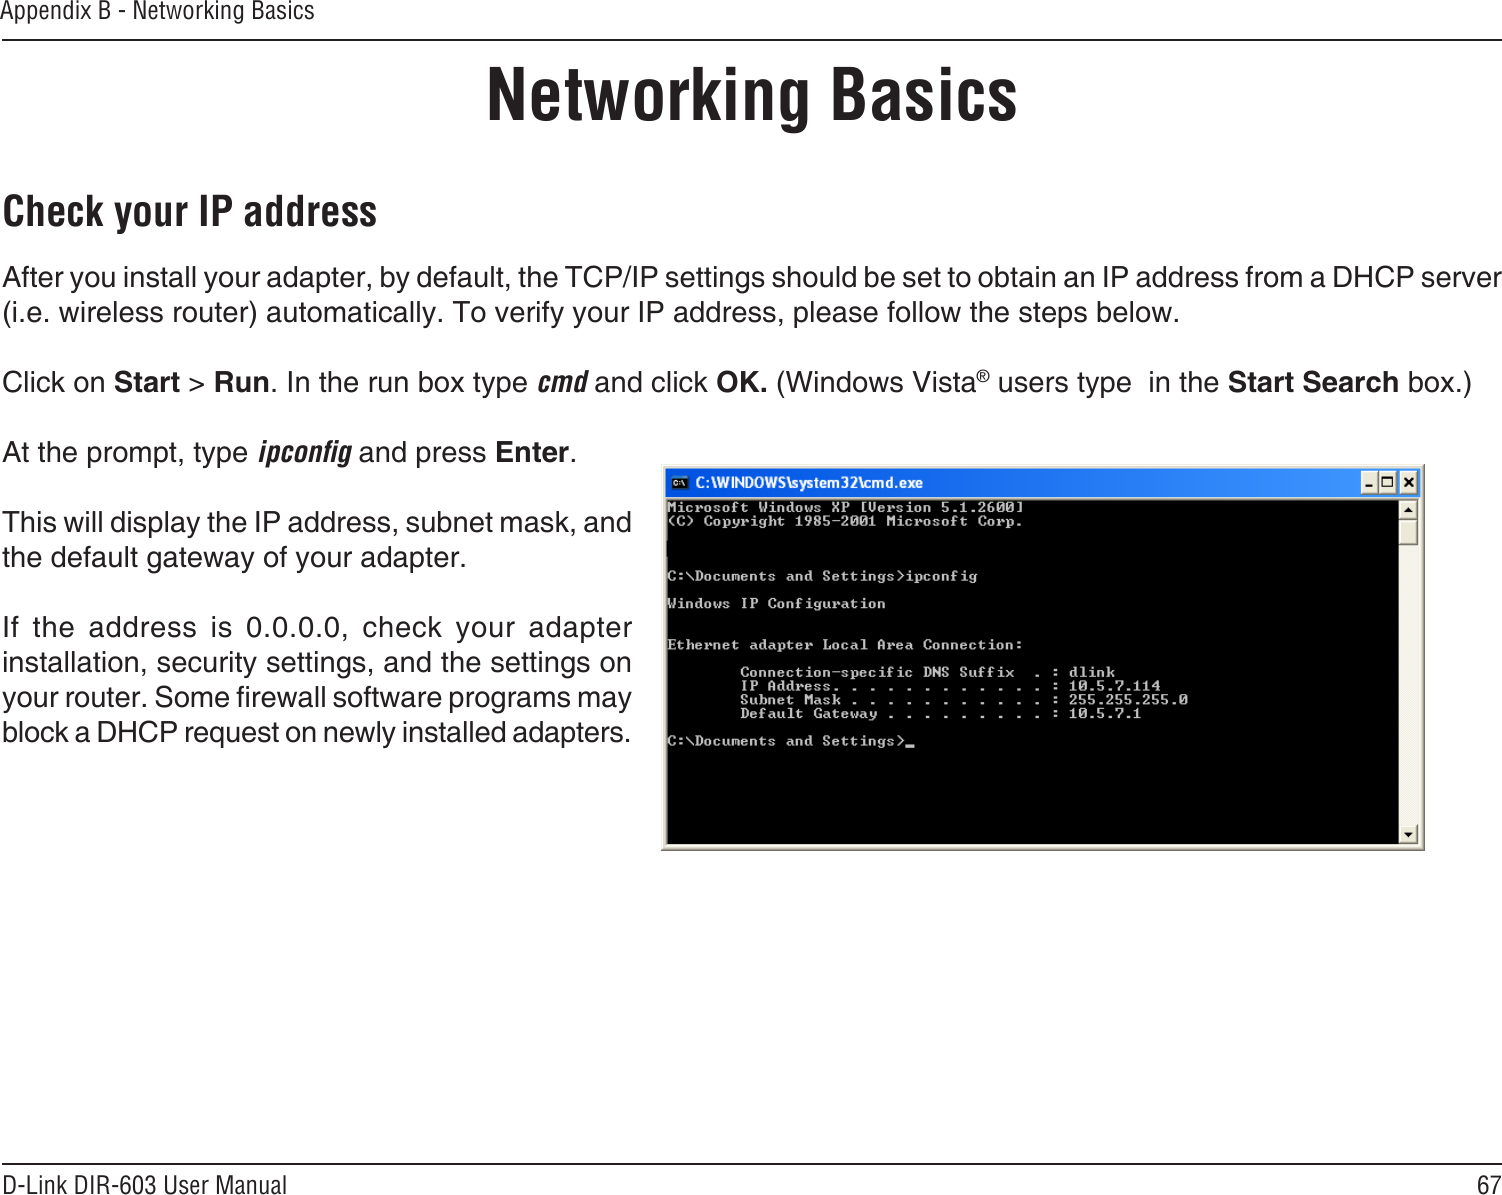 67D-Link DIR-603 User ManualAppendix B - Networking BasicsNetworking BasicsCheck your IP addressAfter you install your adapter, by default, the TCP/IP settings should be set to obtain an IP address from a DHCP server (i.e. wireless router) automatically. To verify your IP address, please follow the steps below.Click on Start &gt; Run. In the run box type cmd and click OK. (Windows Vista® users type  in the Start Search box.)At the prompt, type ipcong and press Enter.This will display the IP address, subnet mask, and the default gateway of your adapter.If  the  address  is  0.0.0.0,  check  your  adapter installation, security settings, and the settings on your router. Some rewall software programs may block a DHCP request on newly installed adapters. 